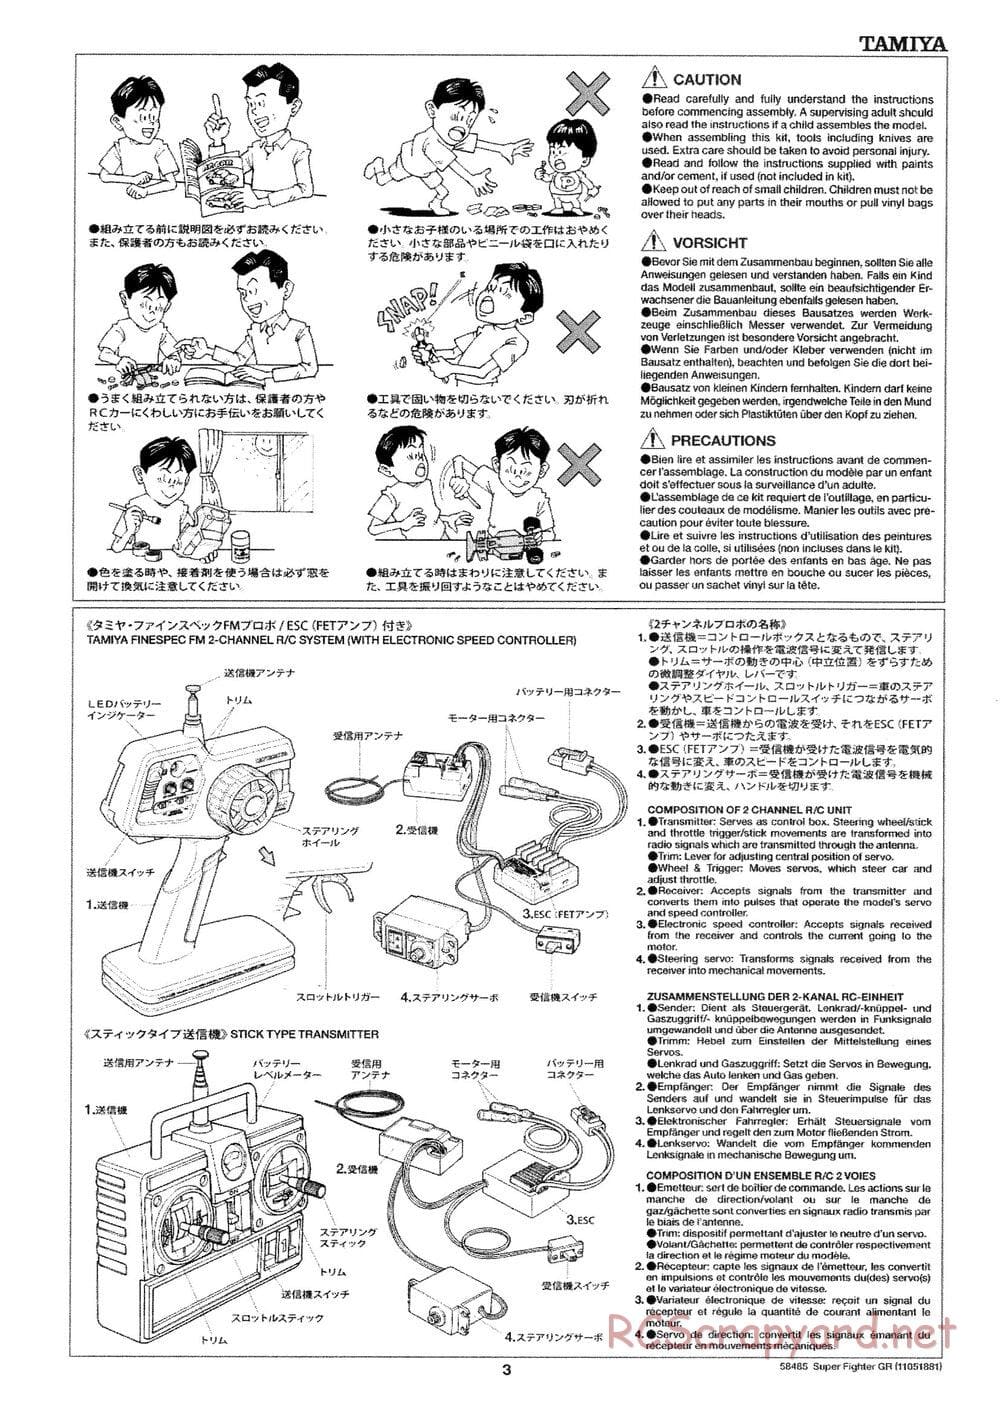 Tamiya - Super Fighter GR - DT-02 Chassis - Manual - Page 3